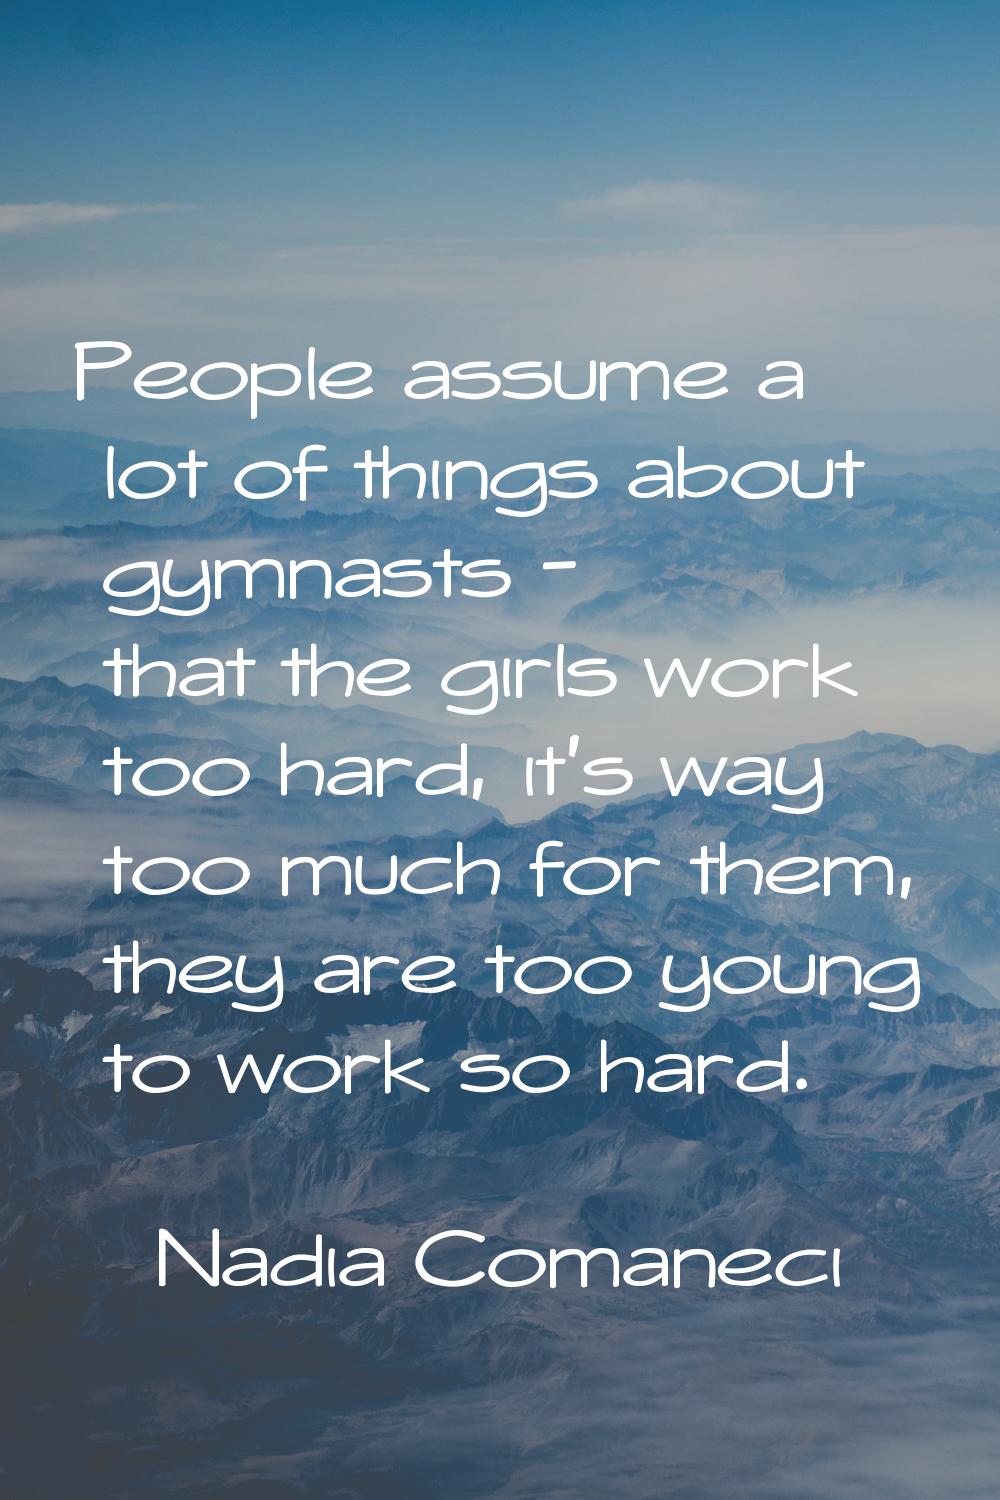 People assume a lot of things about gymnasts - that the girls work too hard, it's way too much for 